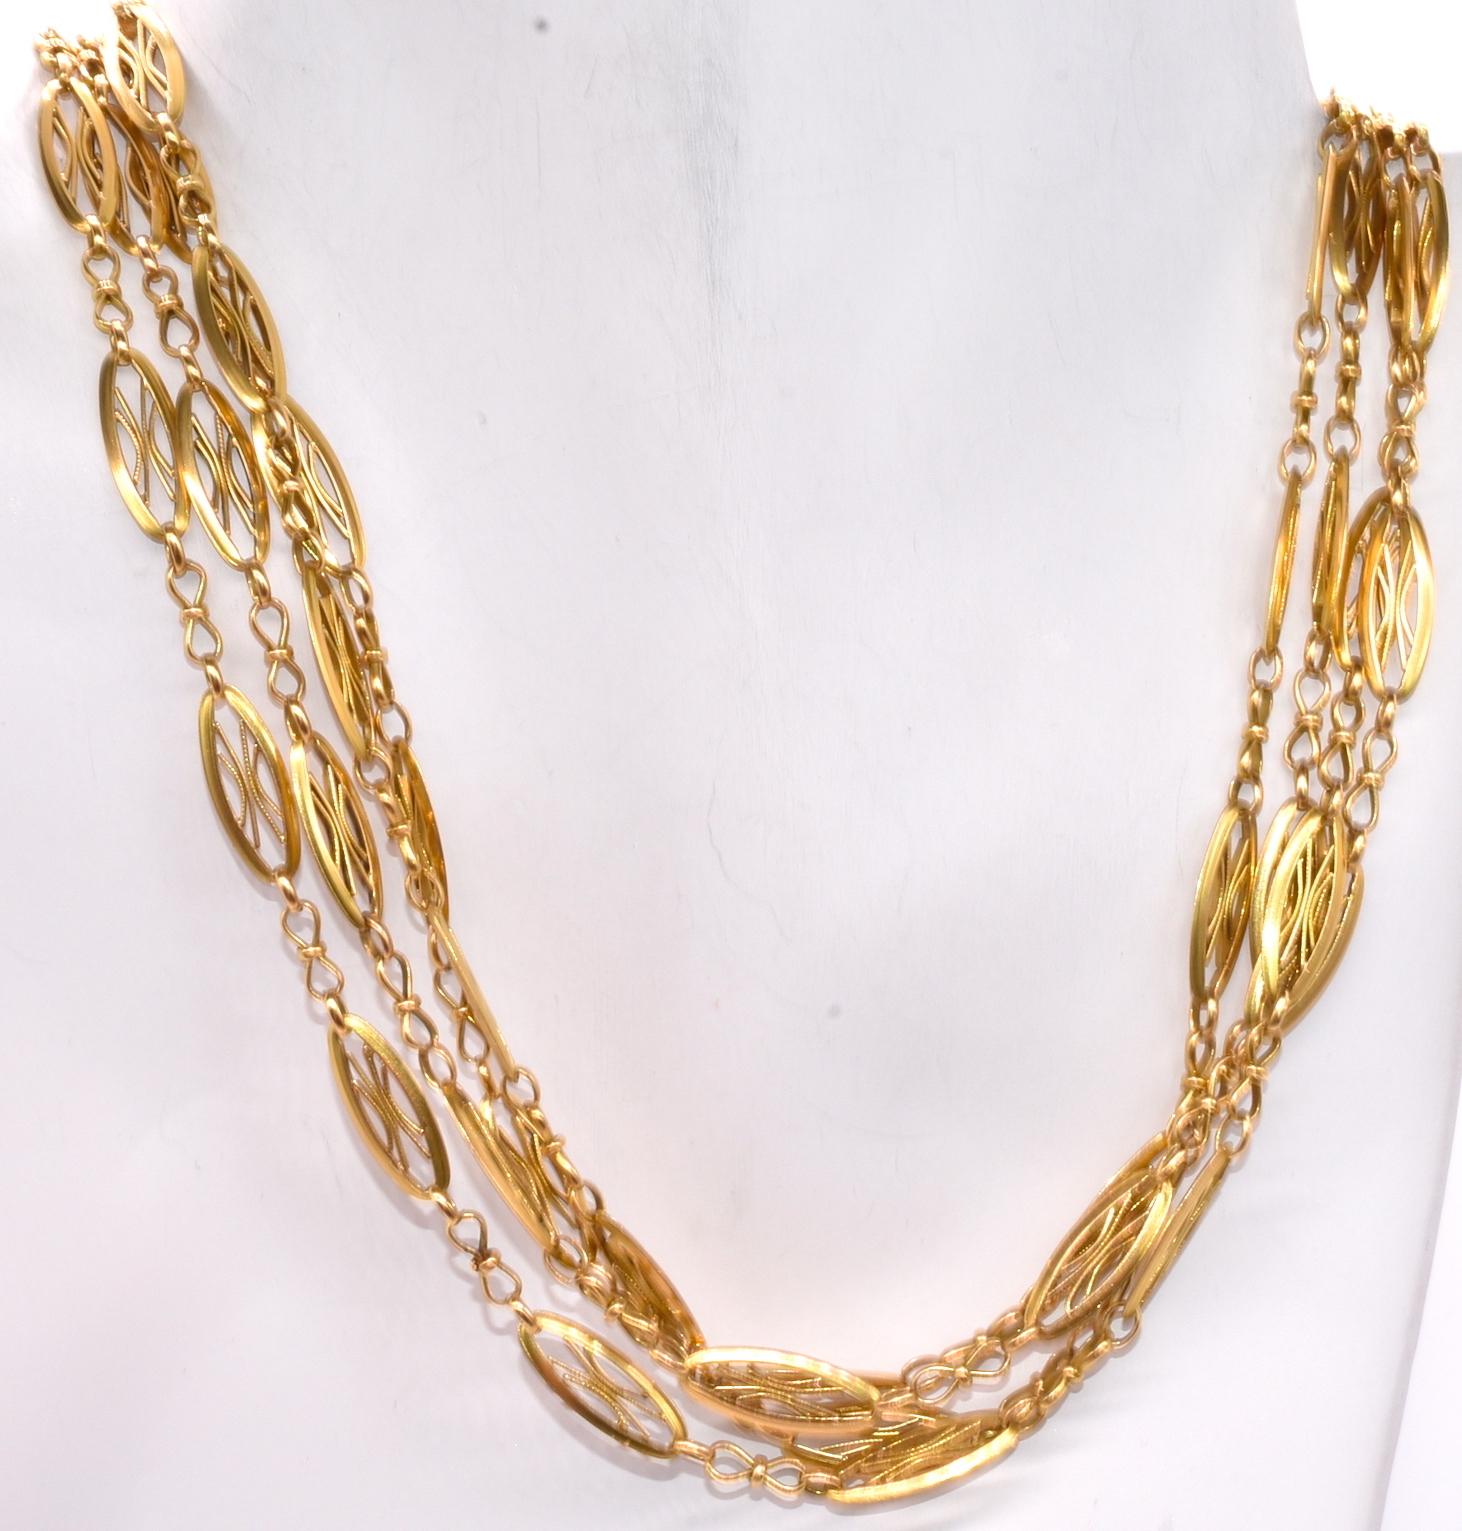 Antique 18 Karat gold French Filigree Watch Chain Necklace In Excellent Condition For Sale In Baltimore, MD